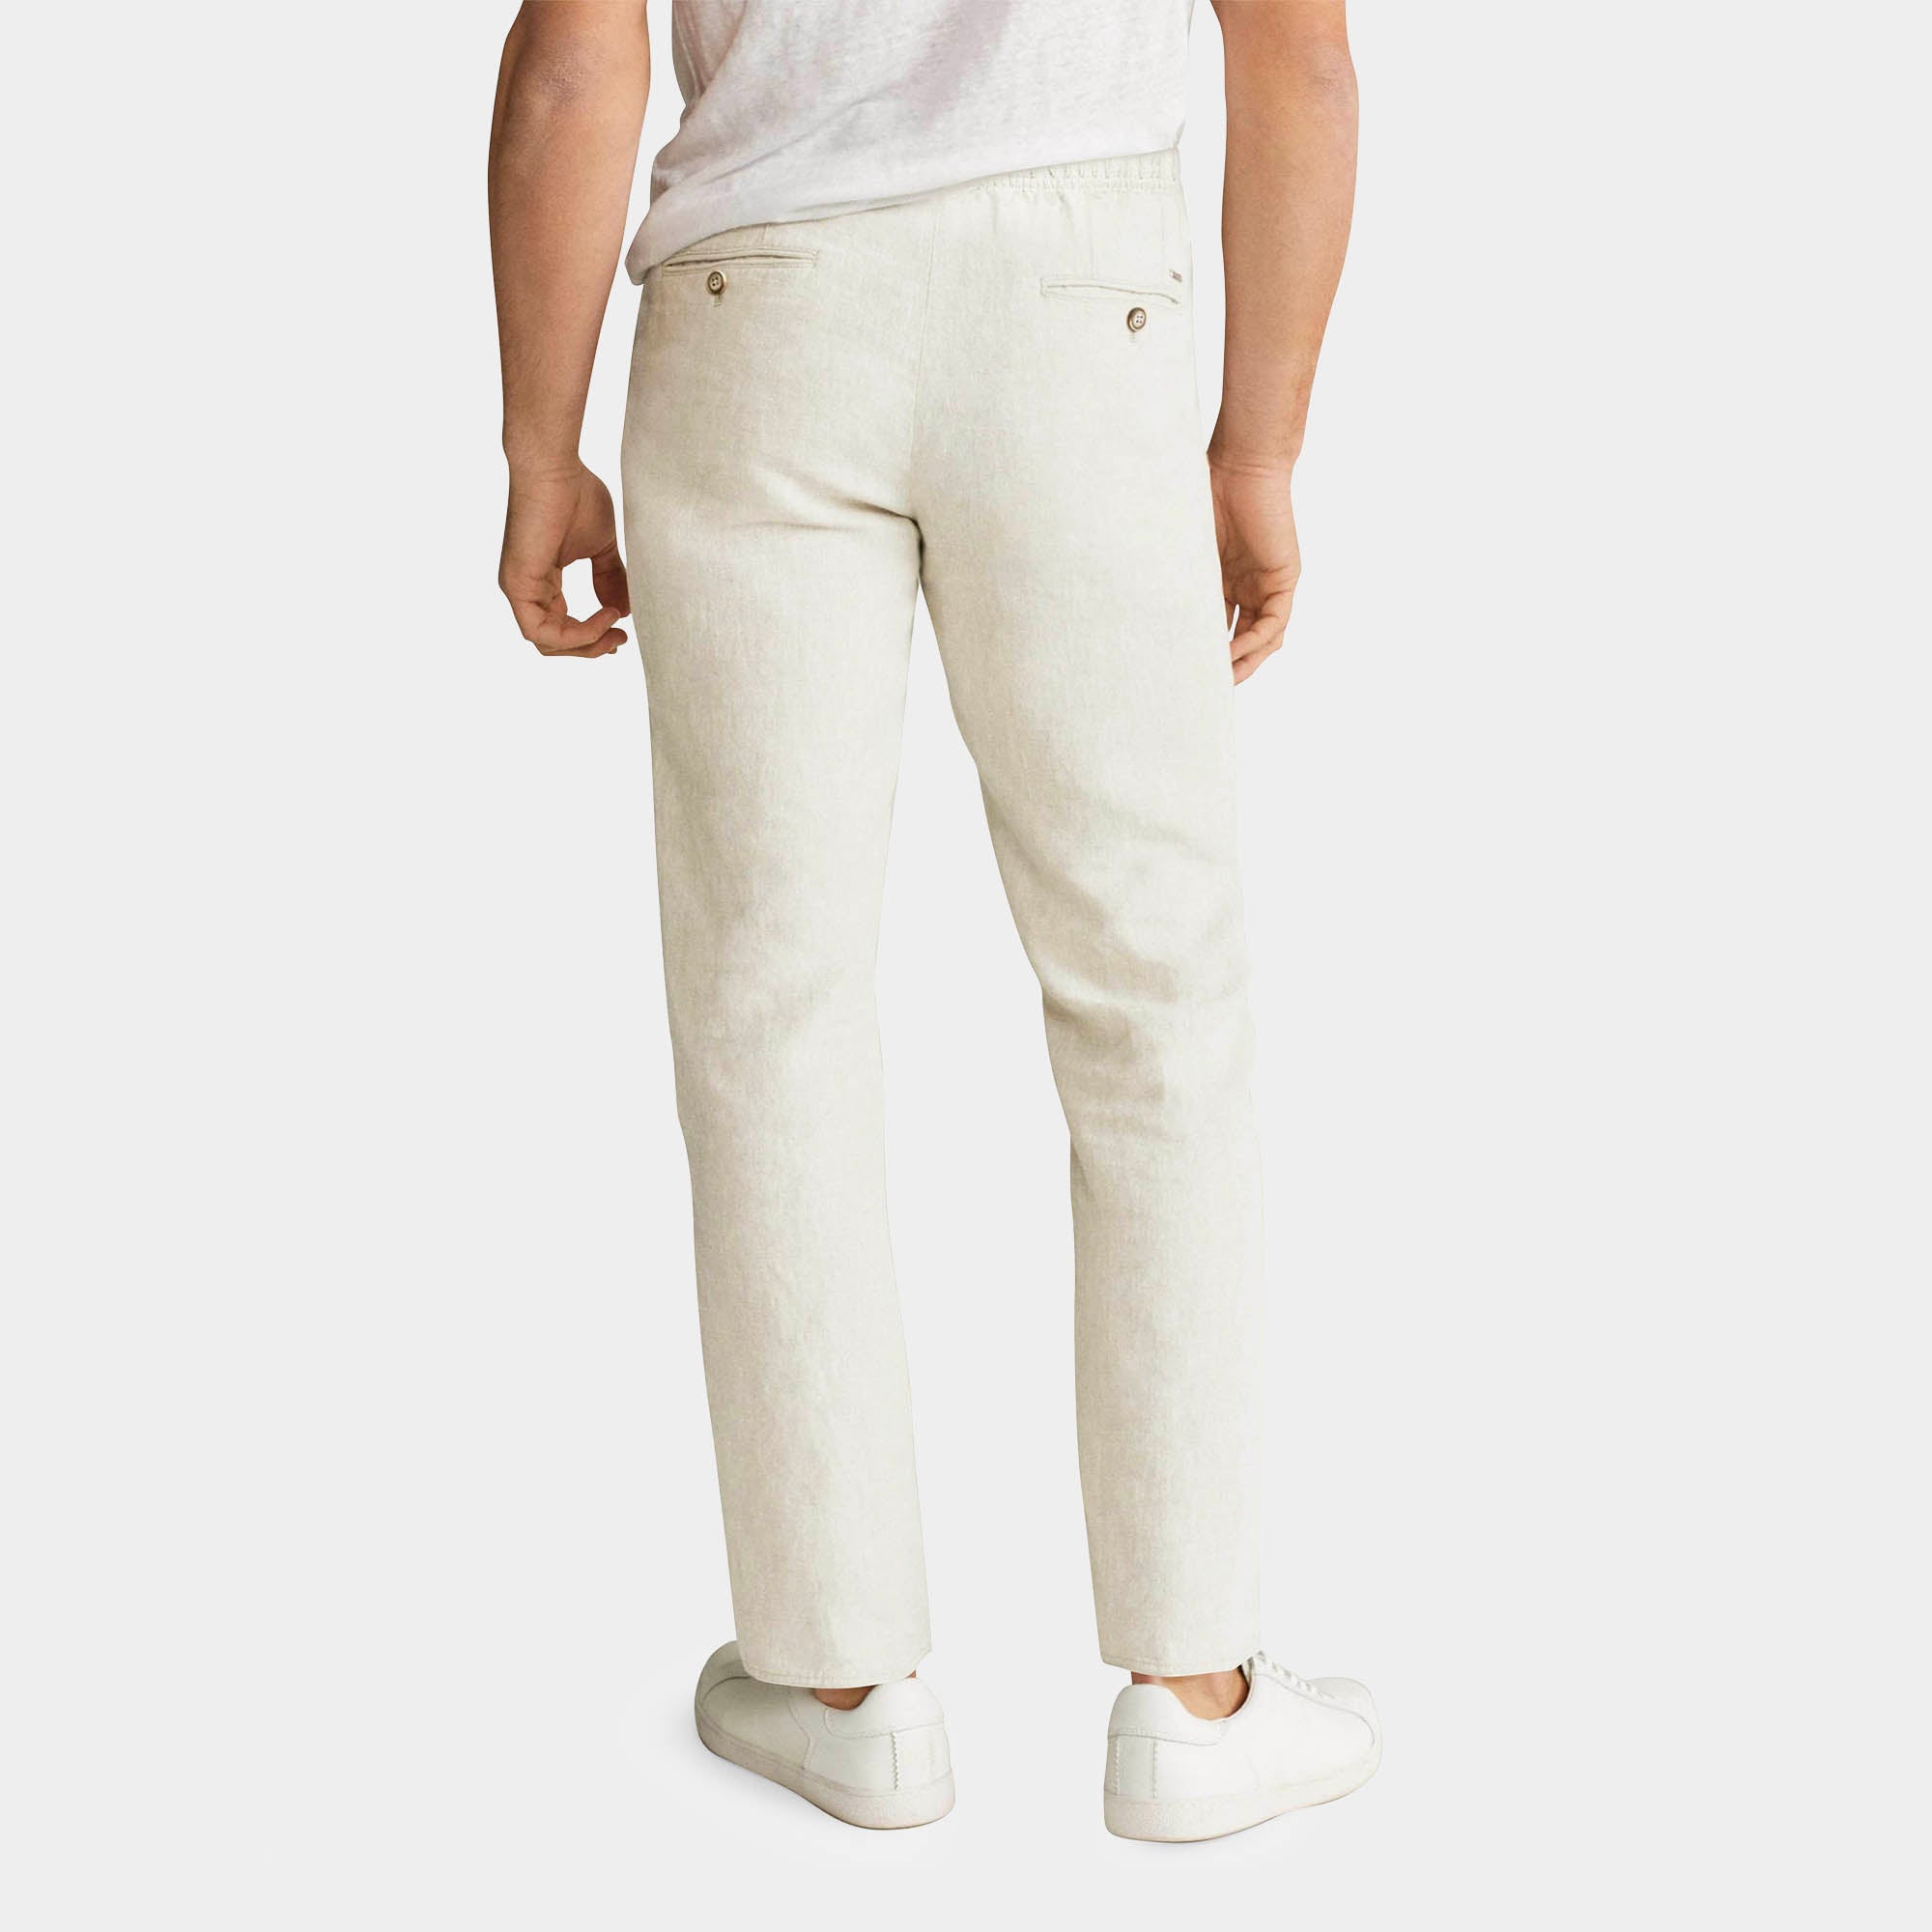 mens linen pants_linen_trousers_work at home_remote_formal business_casual_missy_old navy_wide leg_plus size_petite_linen_blend pants_cotton_macys_zara_oceanside_beach_pants_roxy_romper_drawstring_summer_coverup_tote_resort pants_relax_organic_cotton_hawaii_clearance_Natural Linen